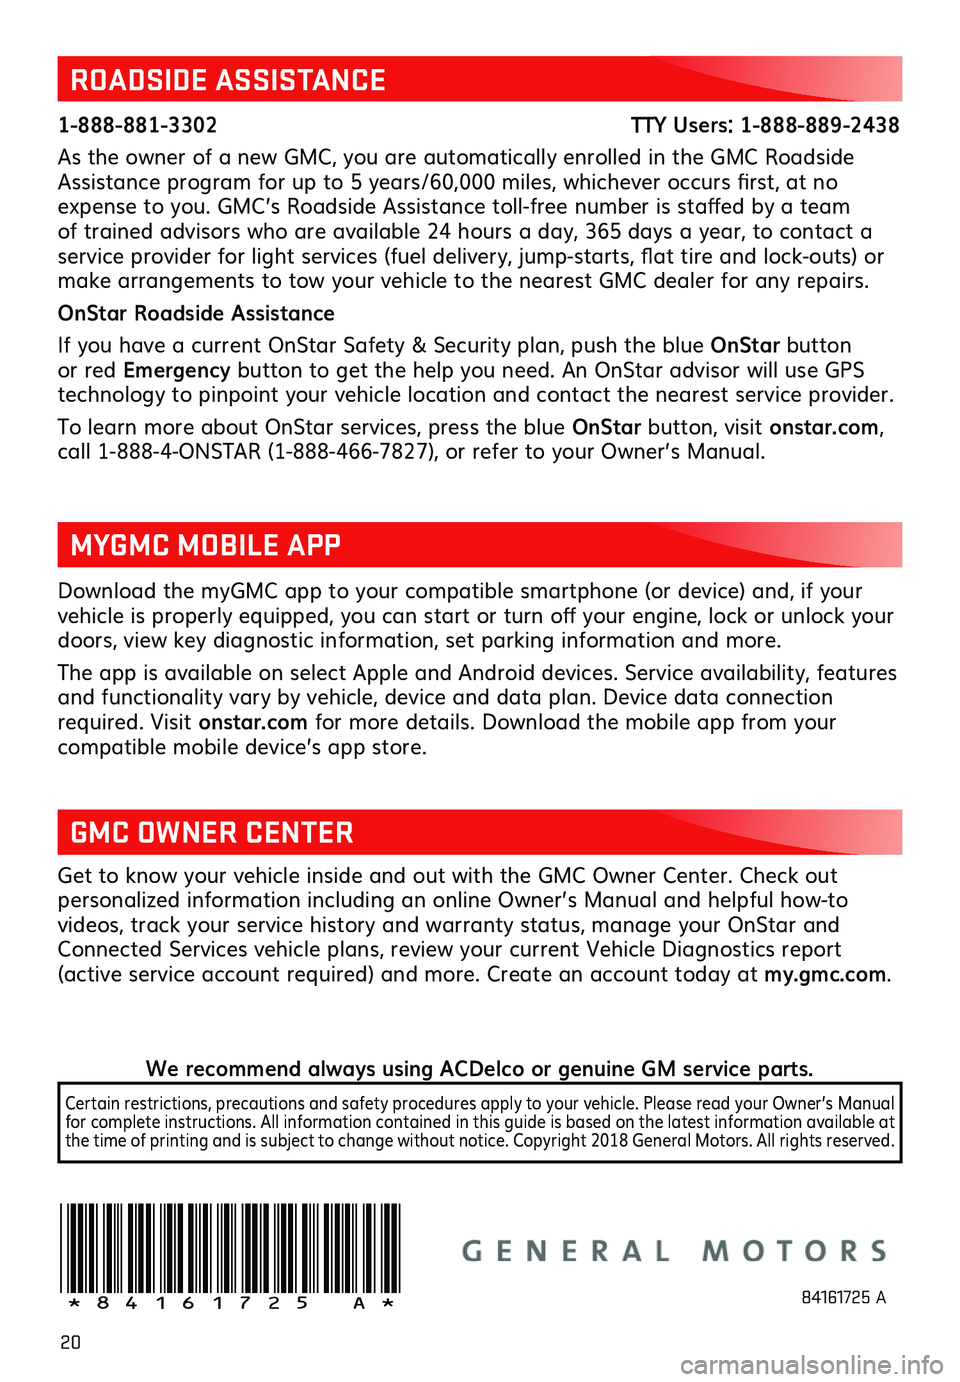 GMC YUKON 2019  Get To Know Guide 20
Download the myGMC  app to your  compatible  smartphone  (or device)  and, if your vehicle  is properly  equipped,  you can  start  or turn  off your  engine,  lock or un